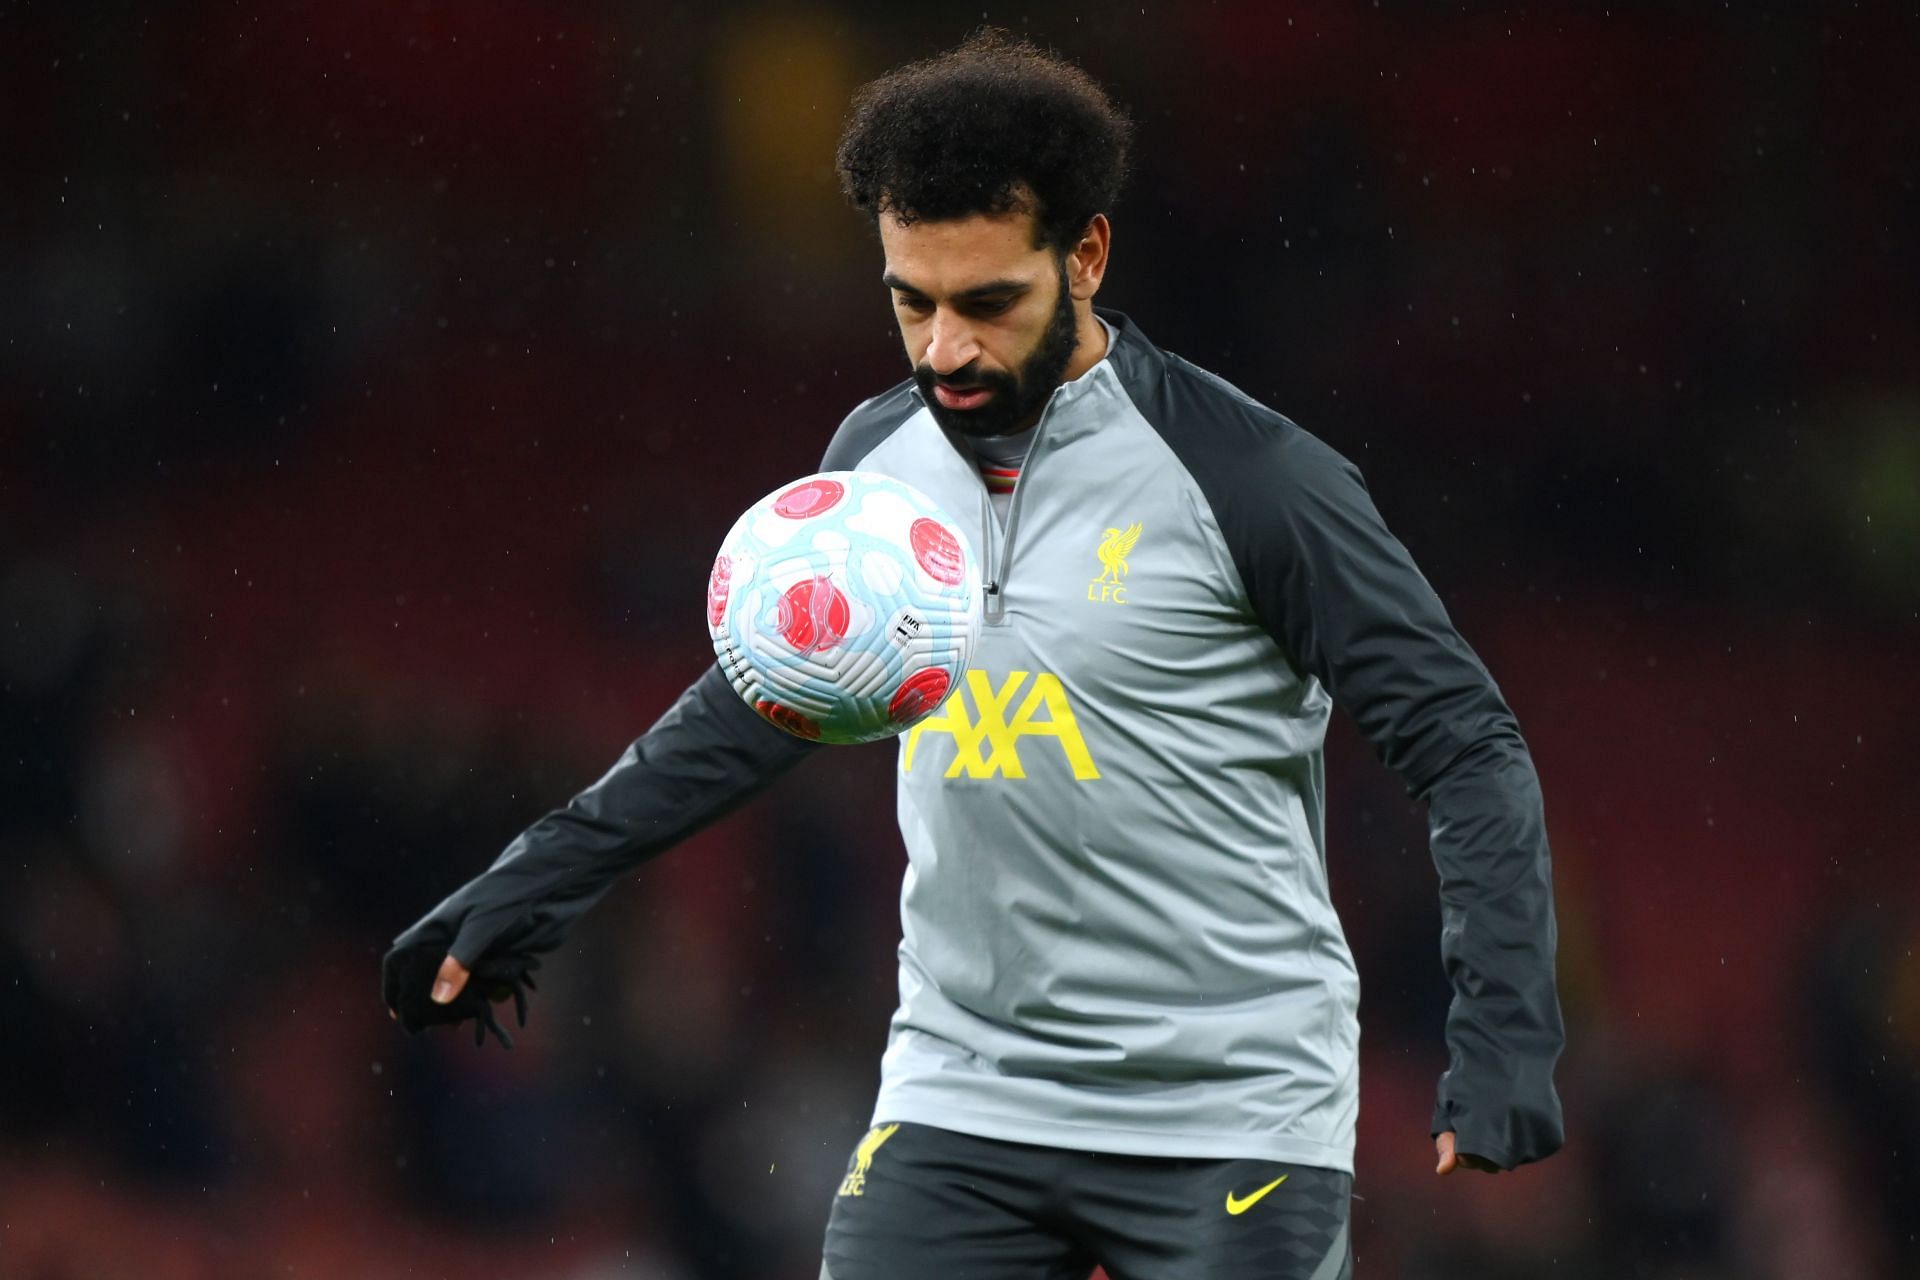 Mohamed Salah is a must-have for your FPL team